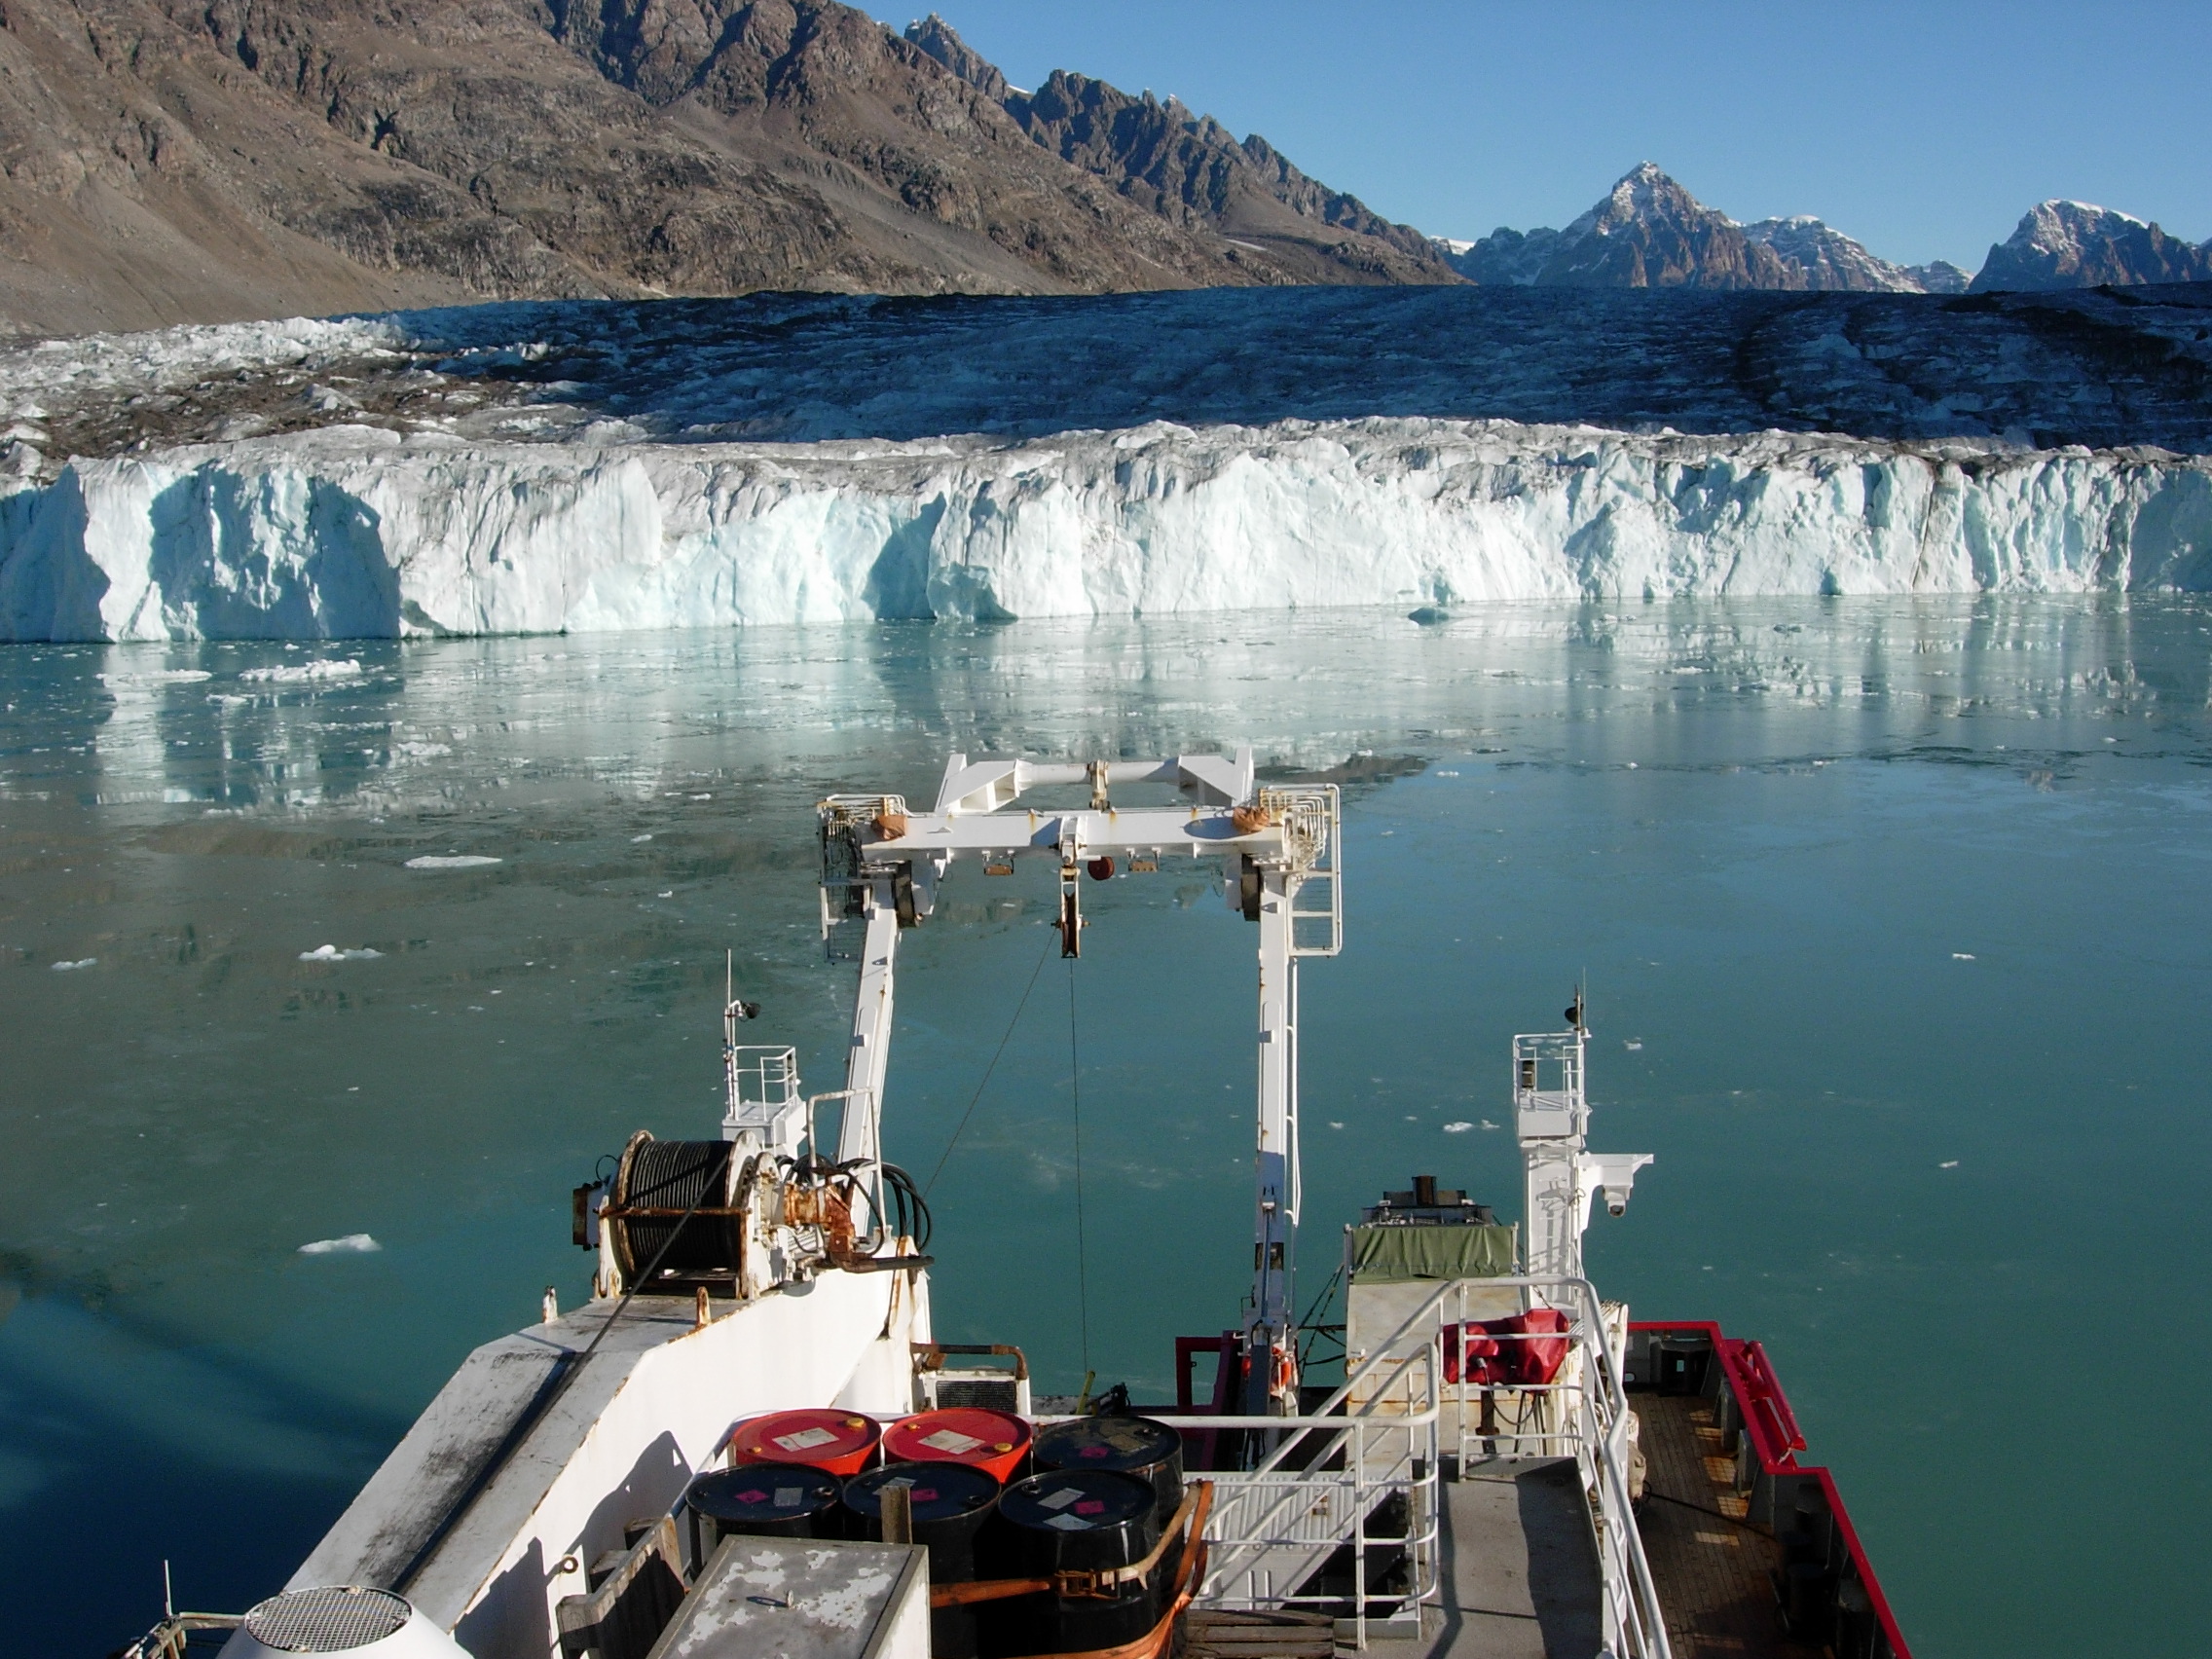 A large ship in a body of water, in front of a glacier